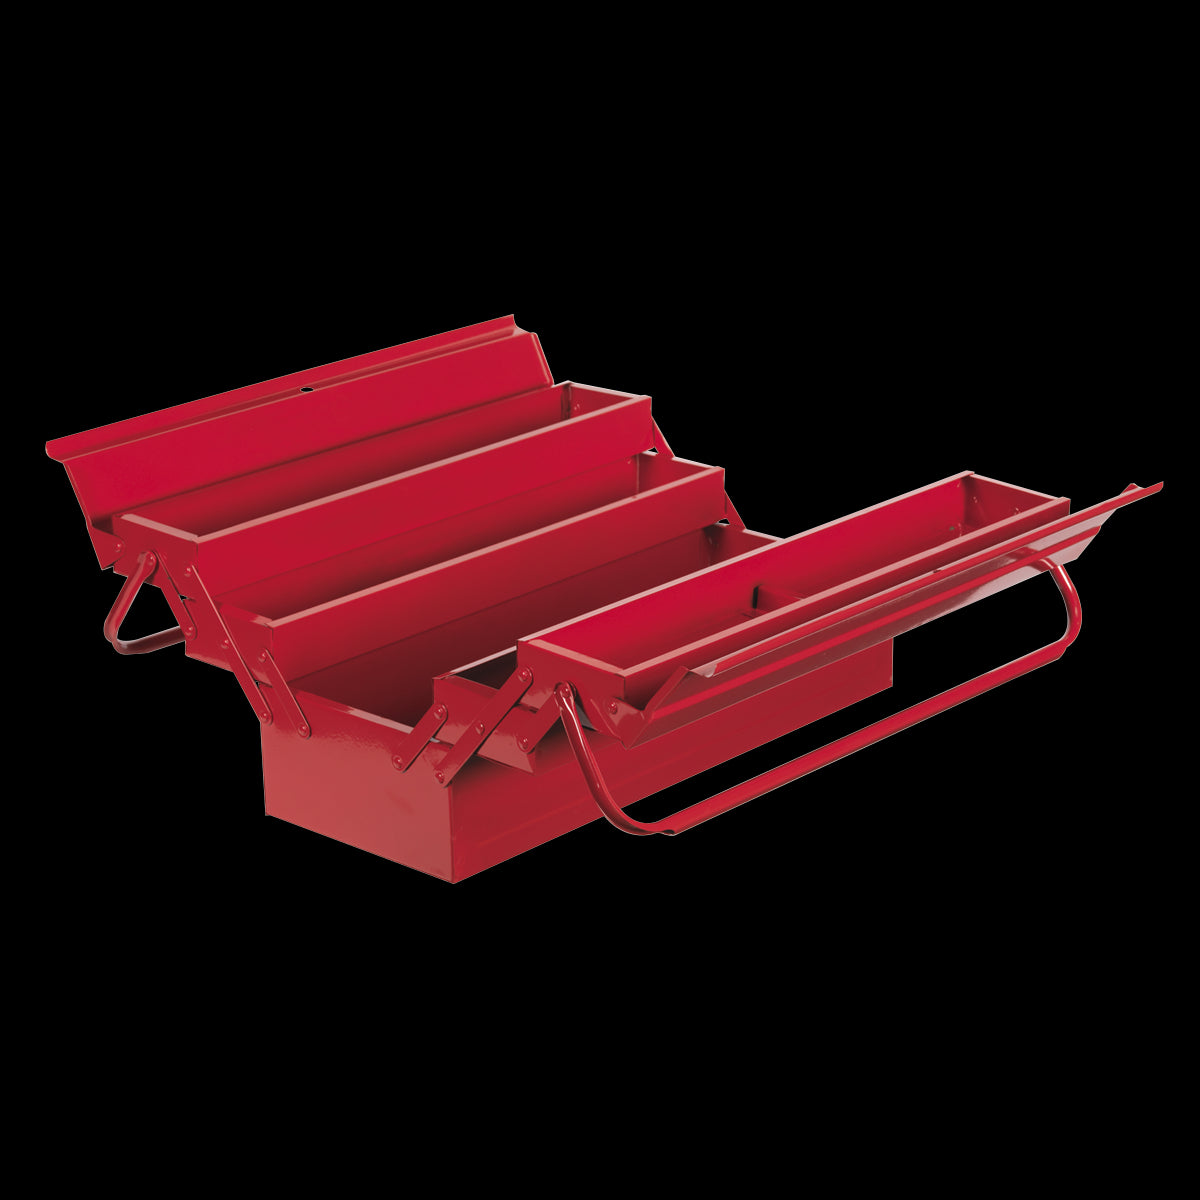 Sealey Cantilever Toolbox 4 Tray 530mm